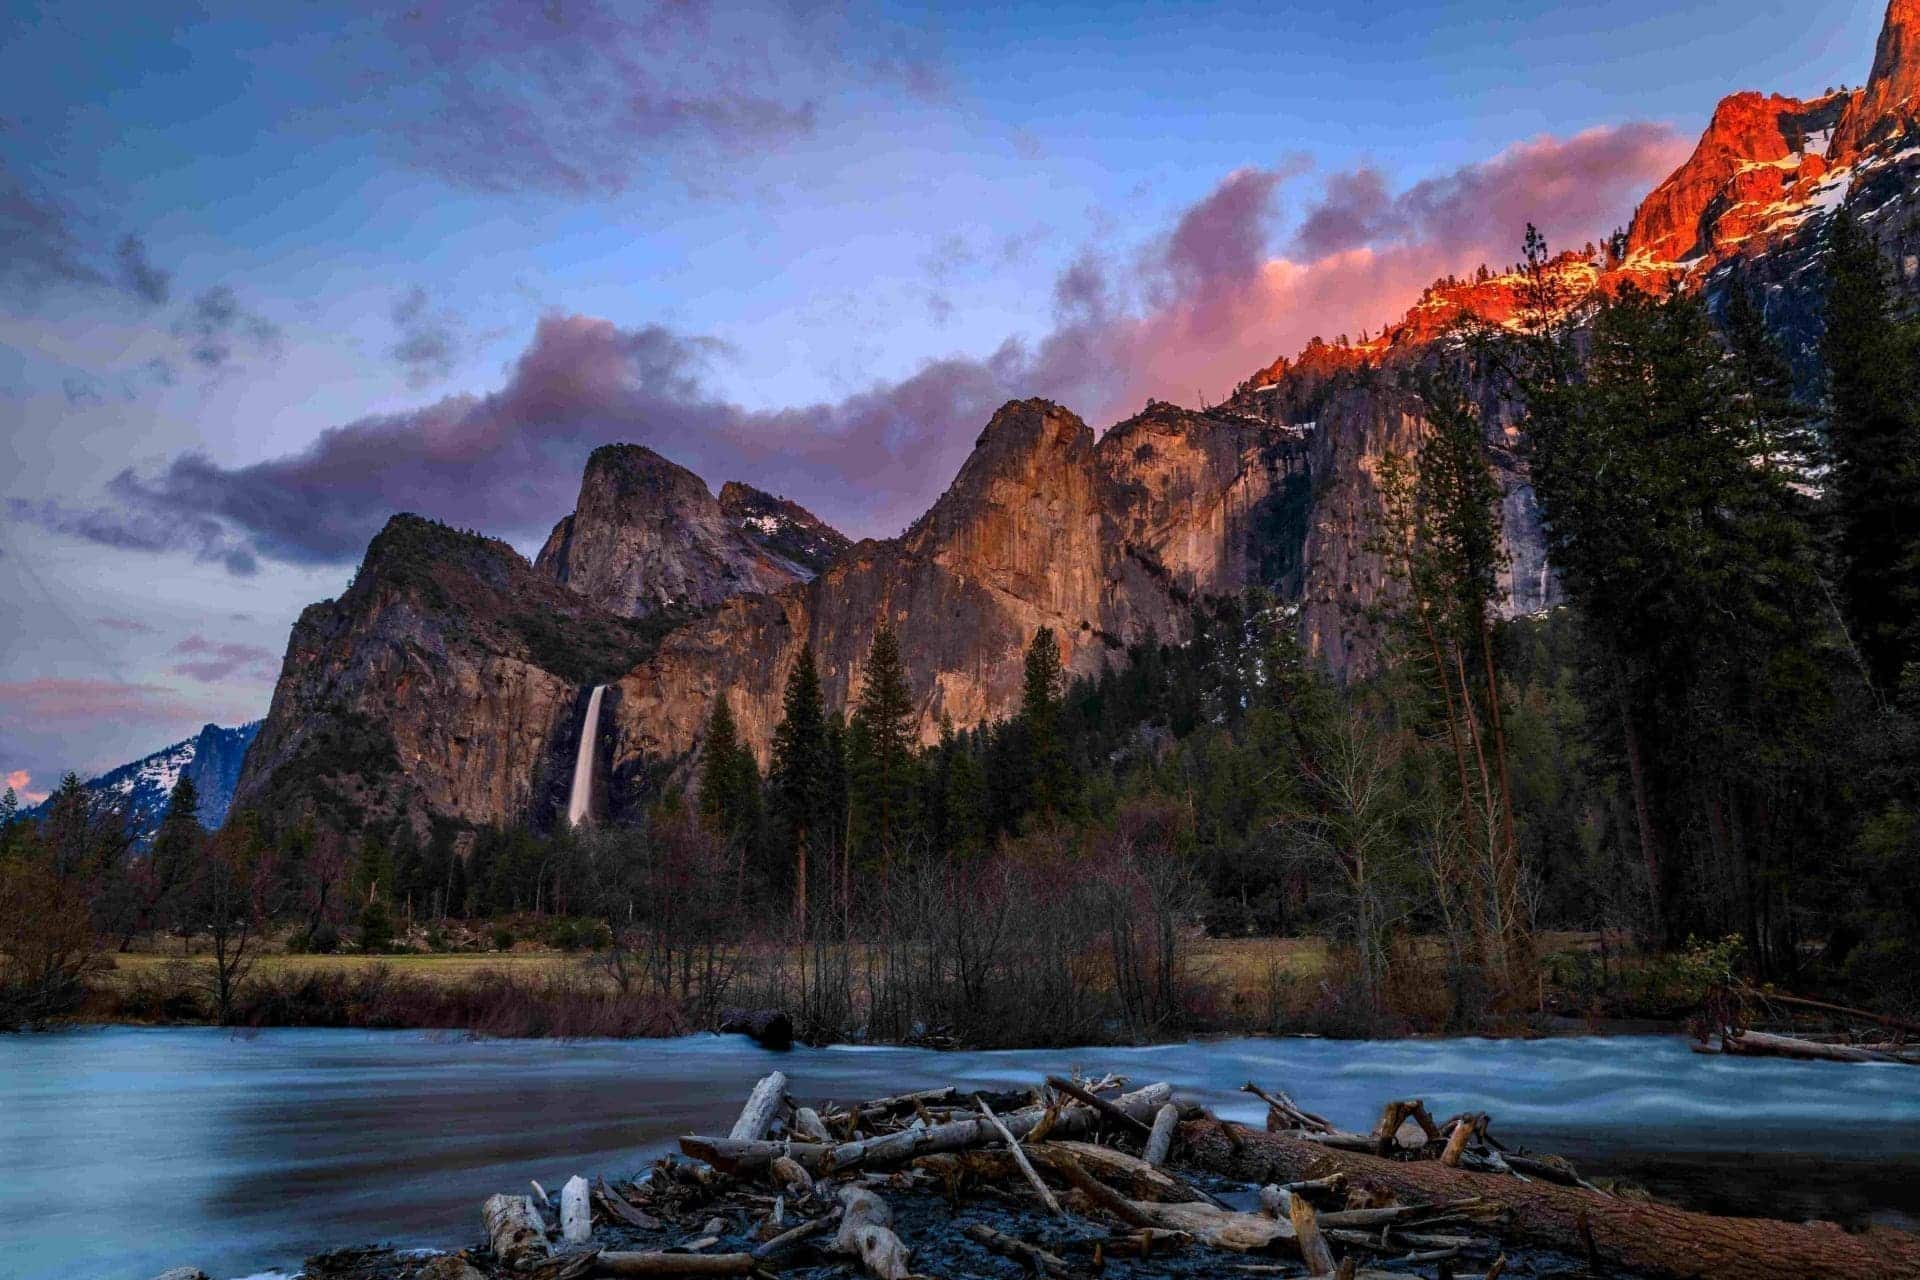 How Many Days Should I Spend in Yosemite National Park?